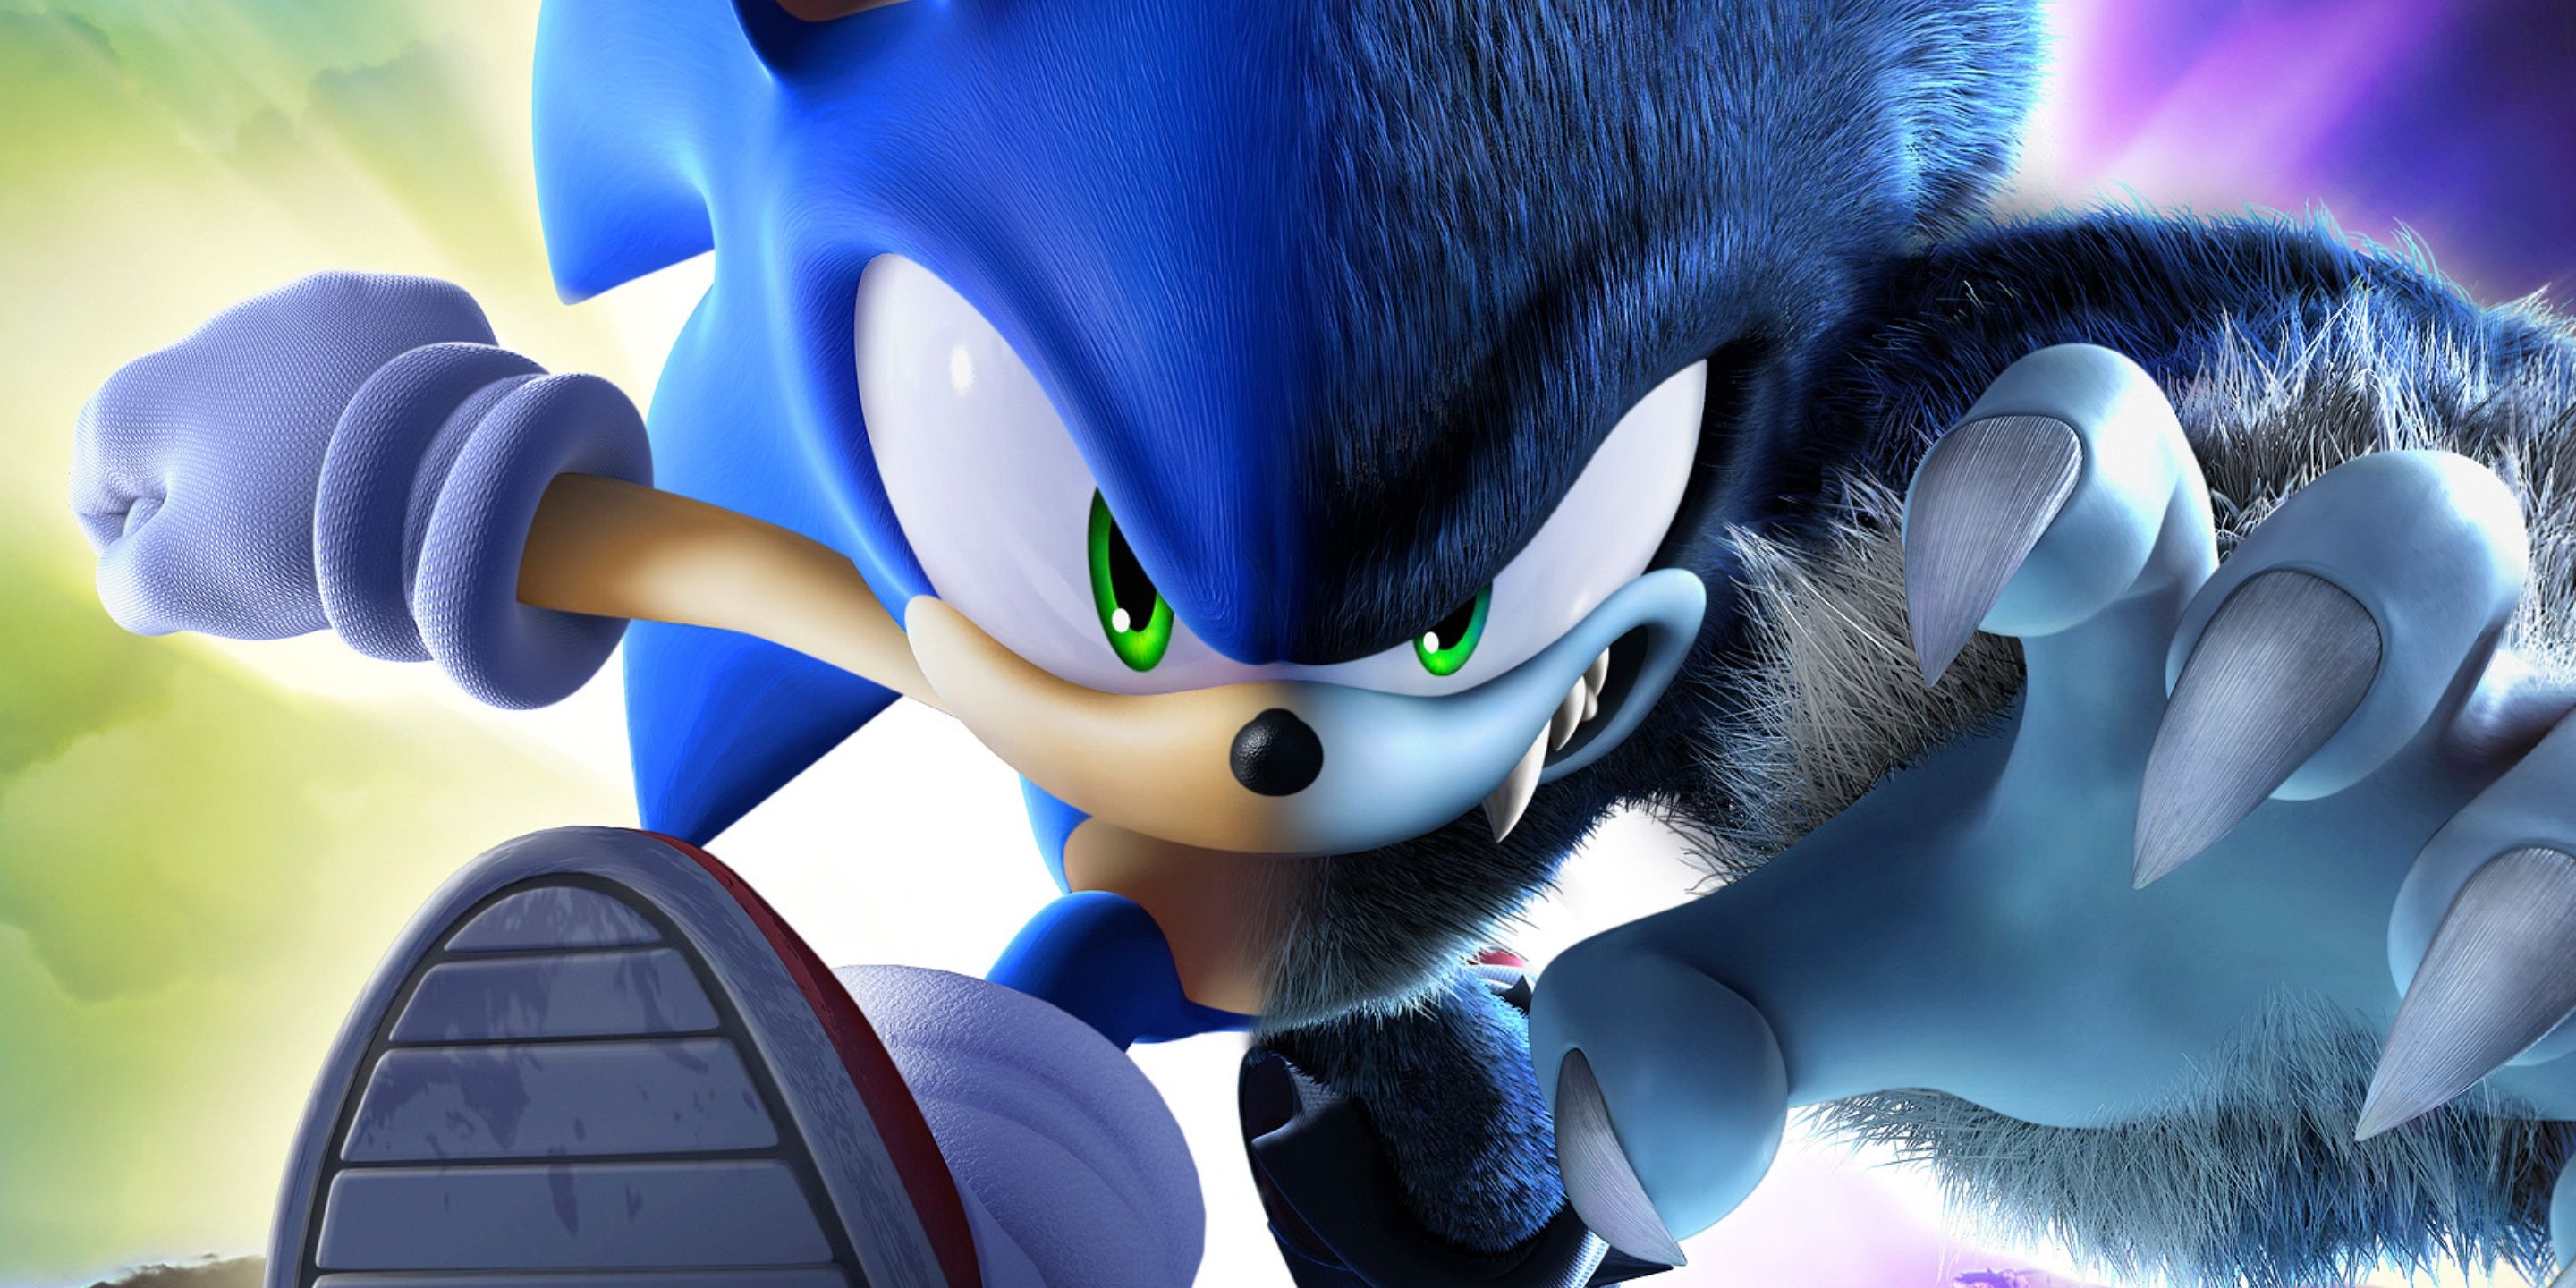 Sonic the Hedgehog semi-morphed into a werepig